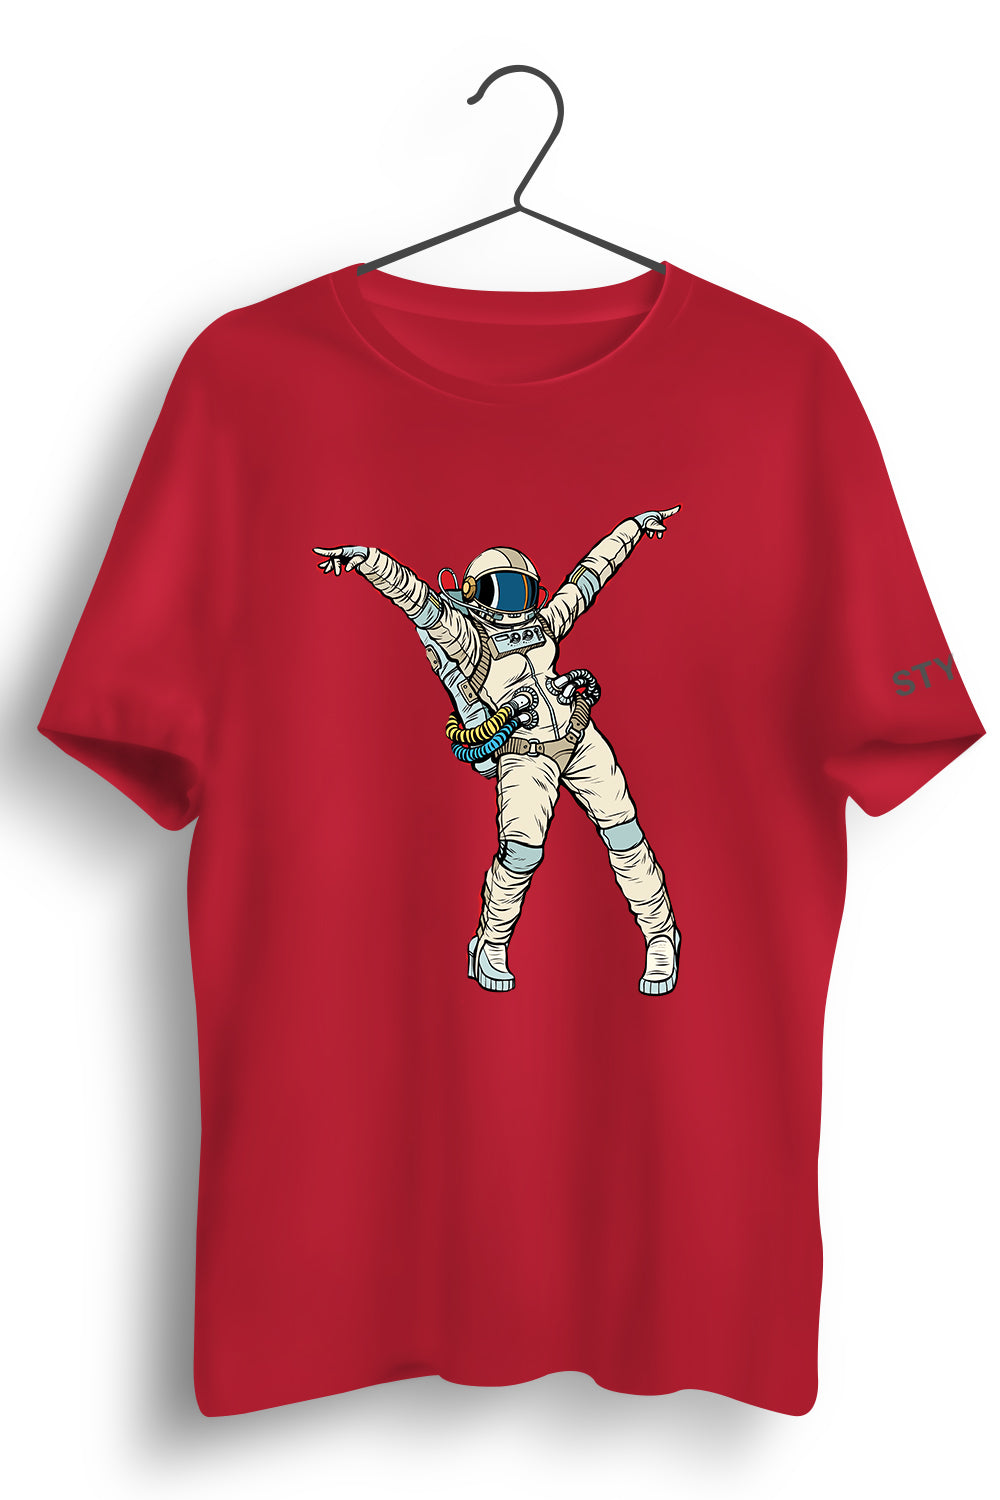 Astroanaut Dancing Graphic Printed Red Tshirt